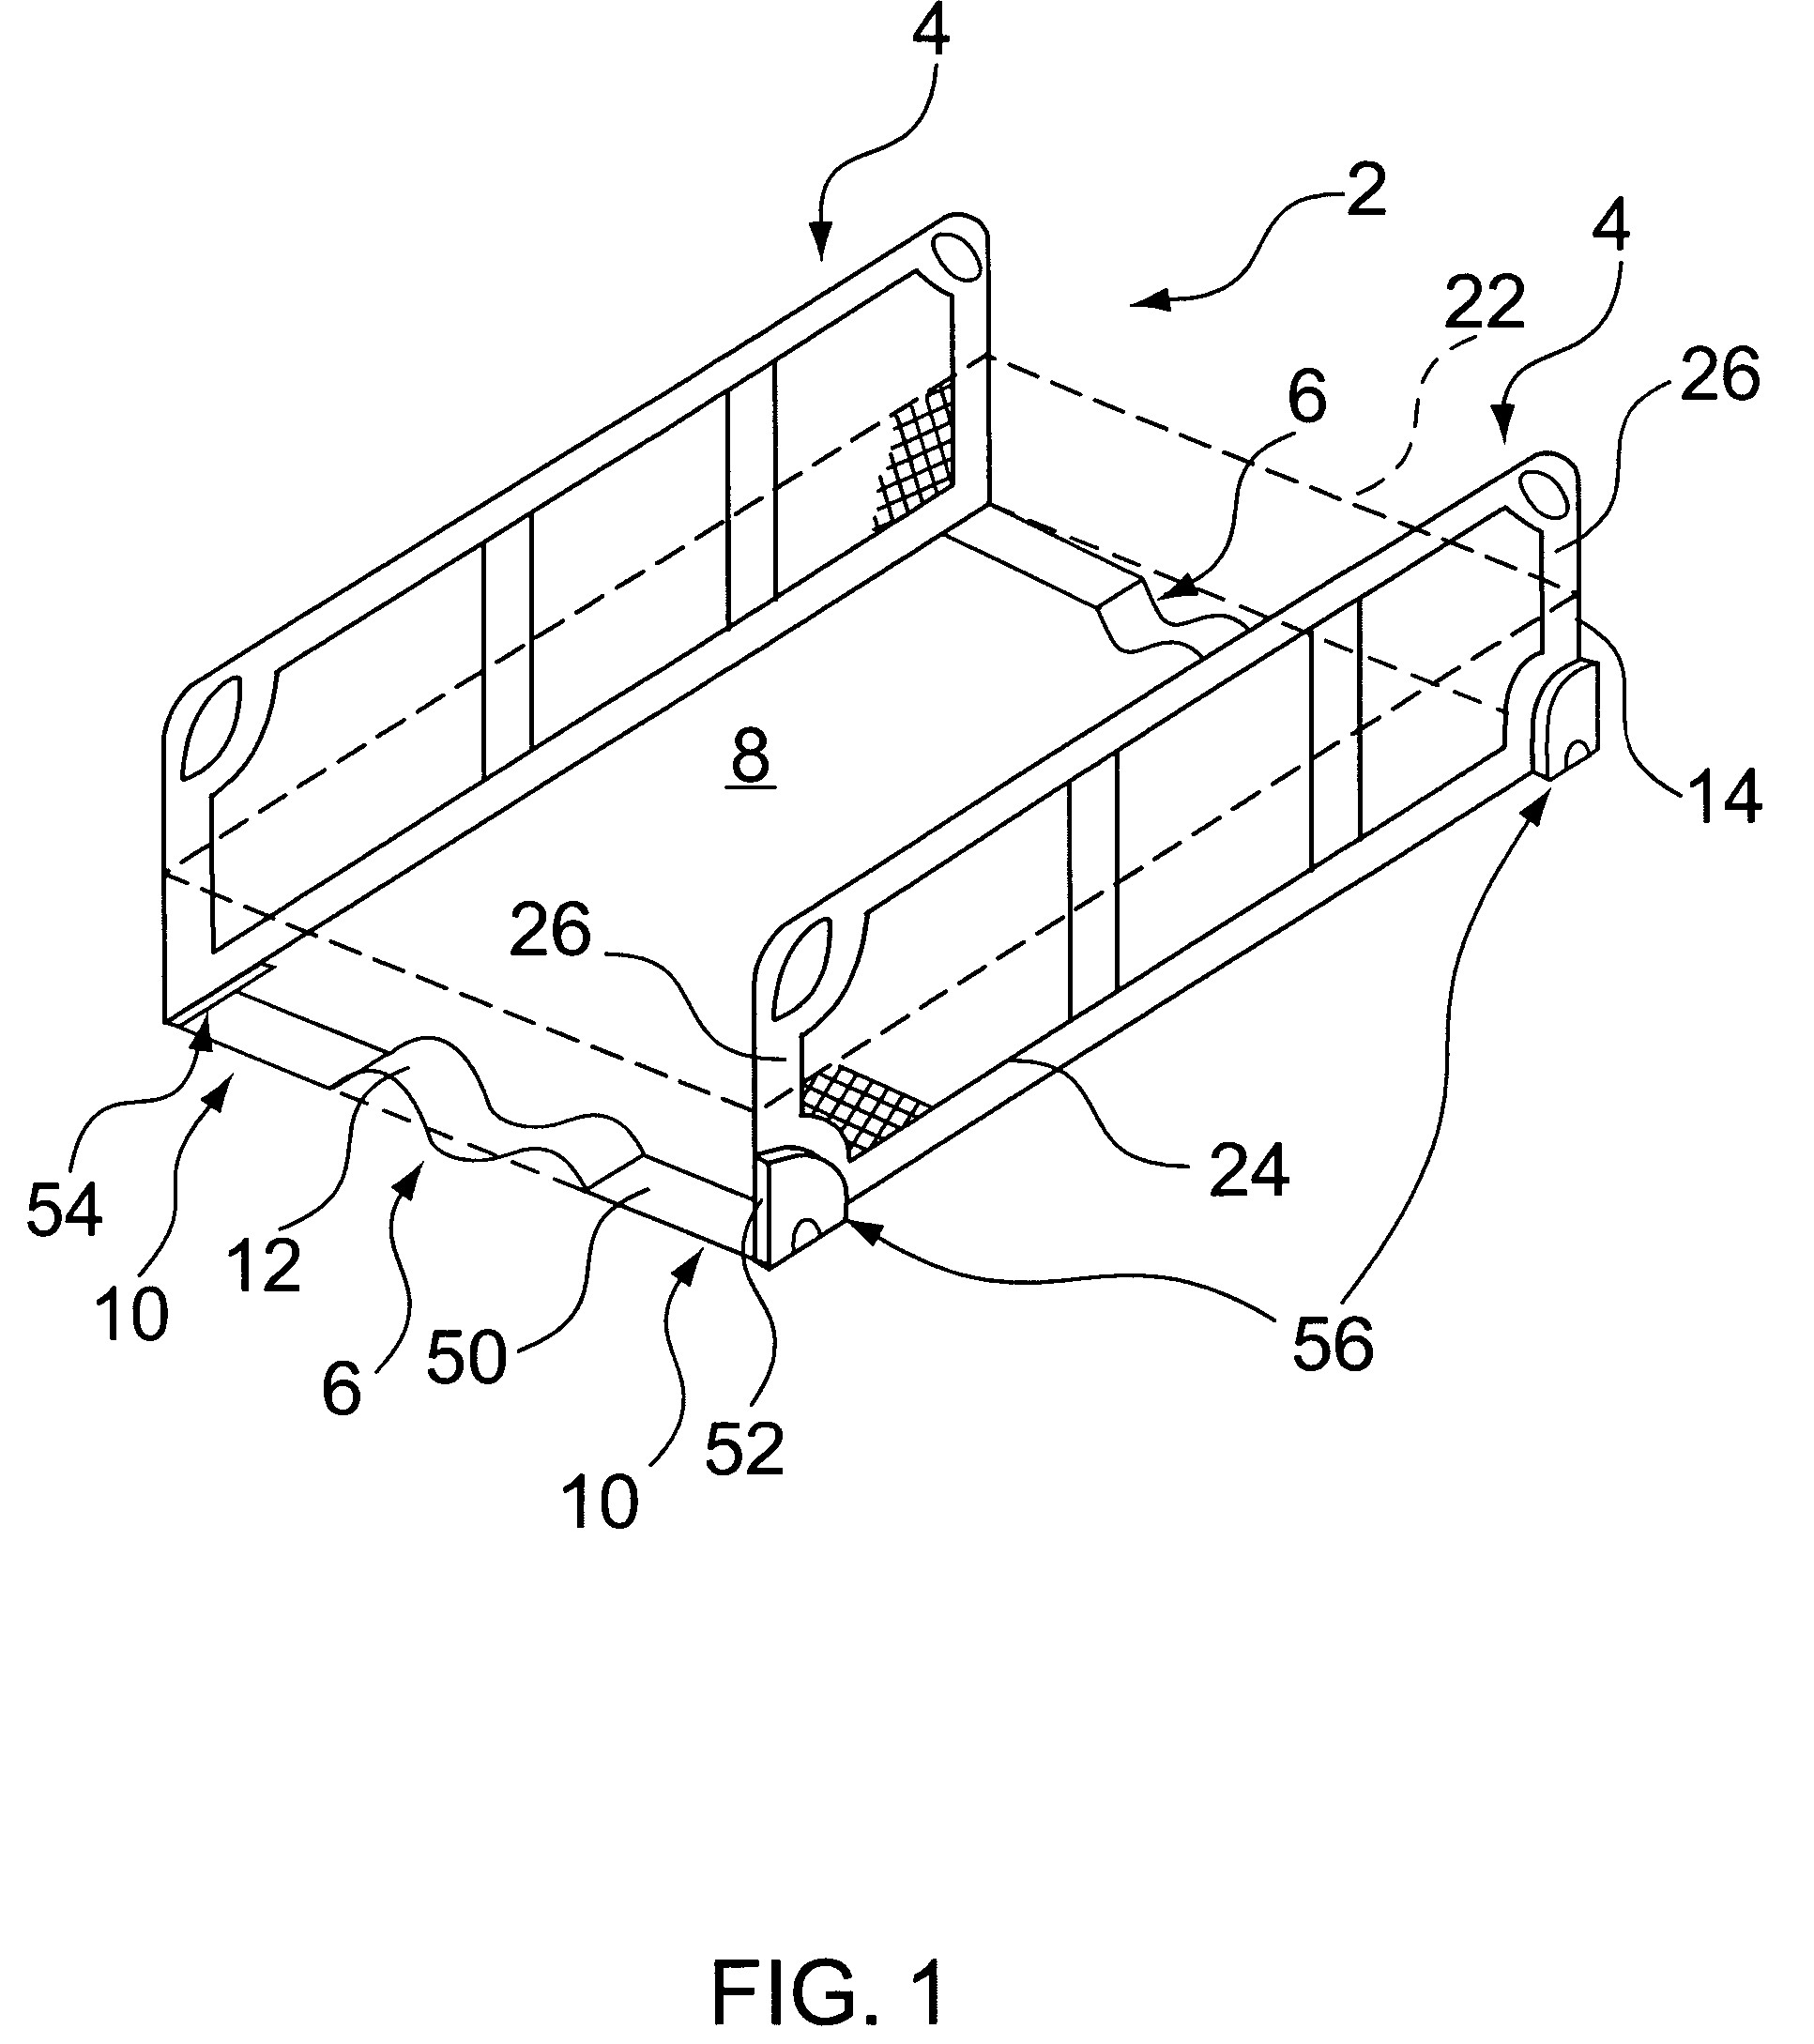 Bed guard assembly